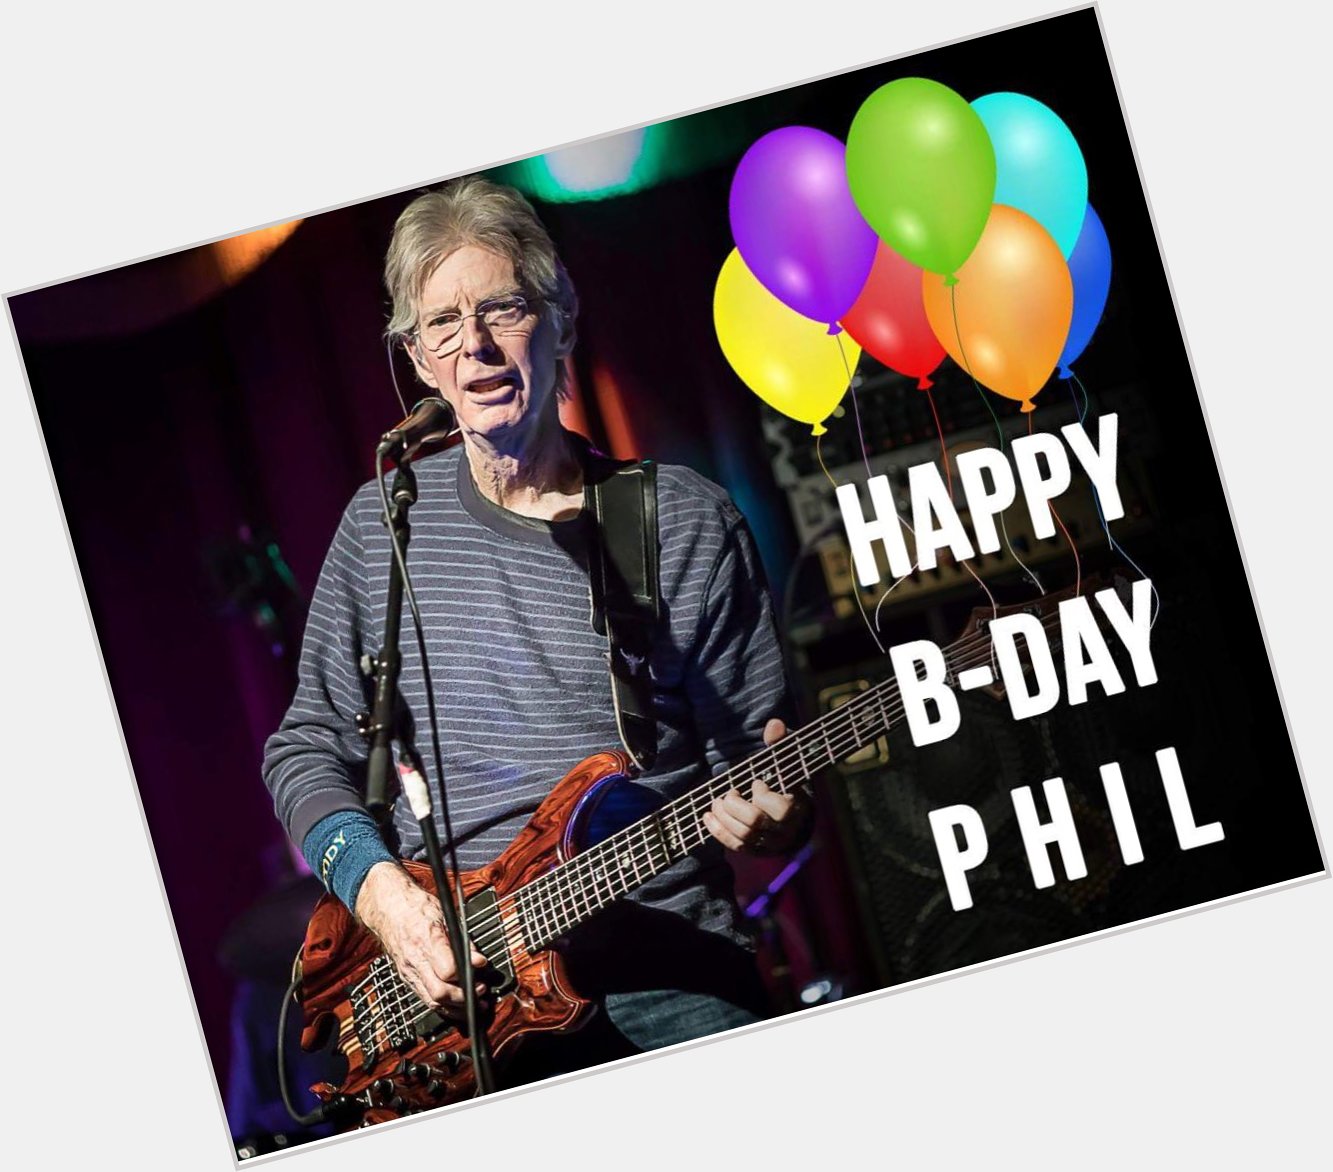 A very happy birthday to Phil Lesh and can t wait to see him Saturday!!!  